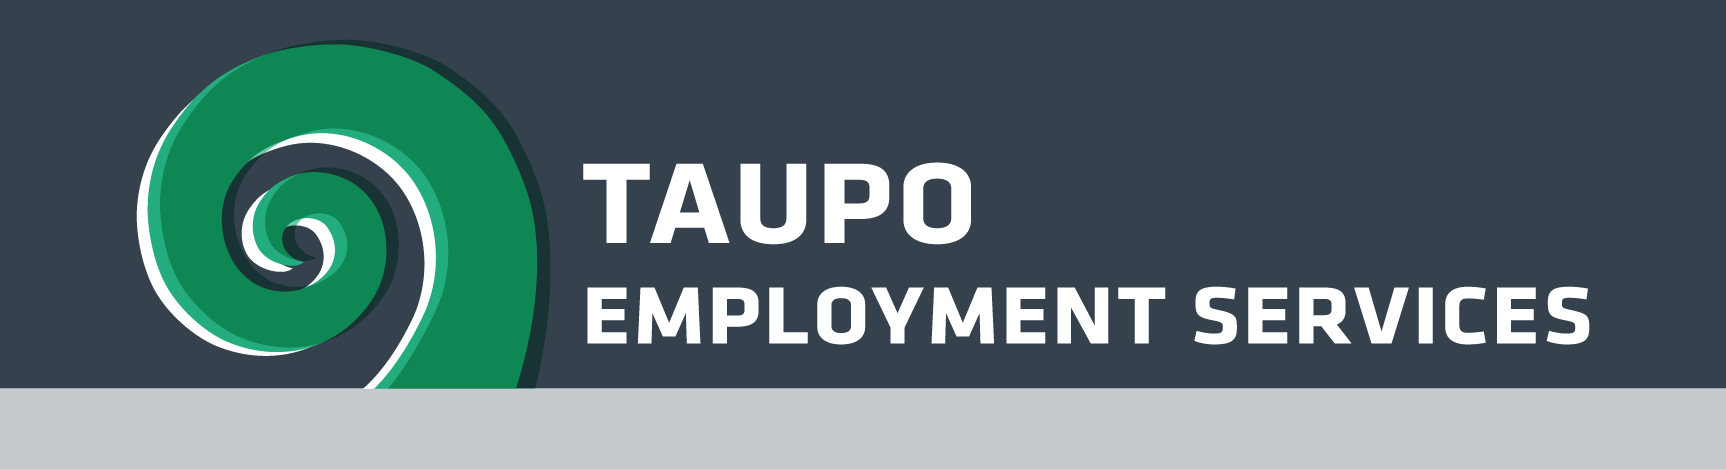 Taupo Employment Services